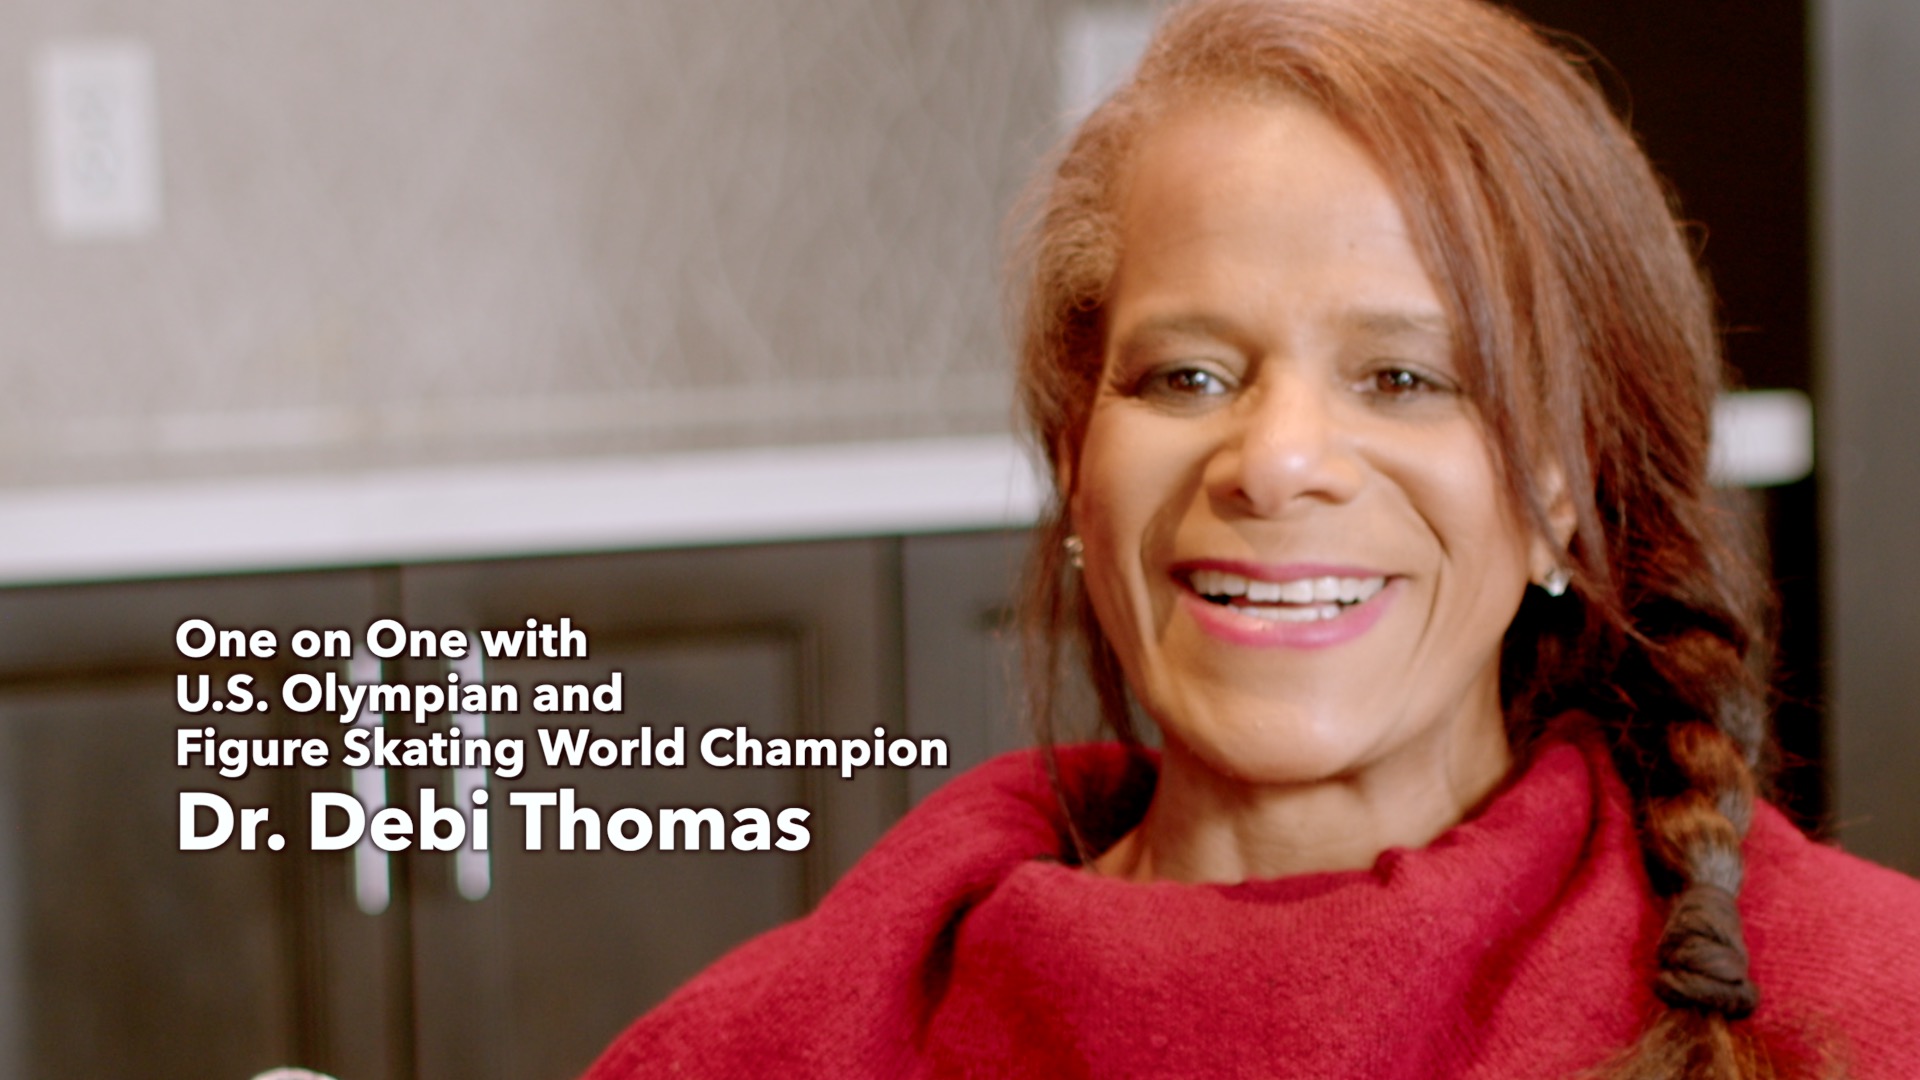 One on one with Olympic medalist and figure skating world champion Dr. Debi Thomas